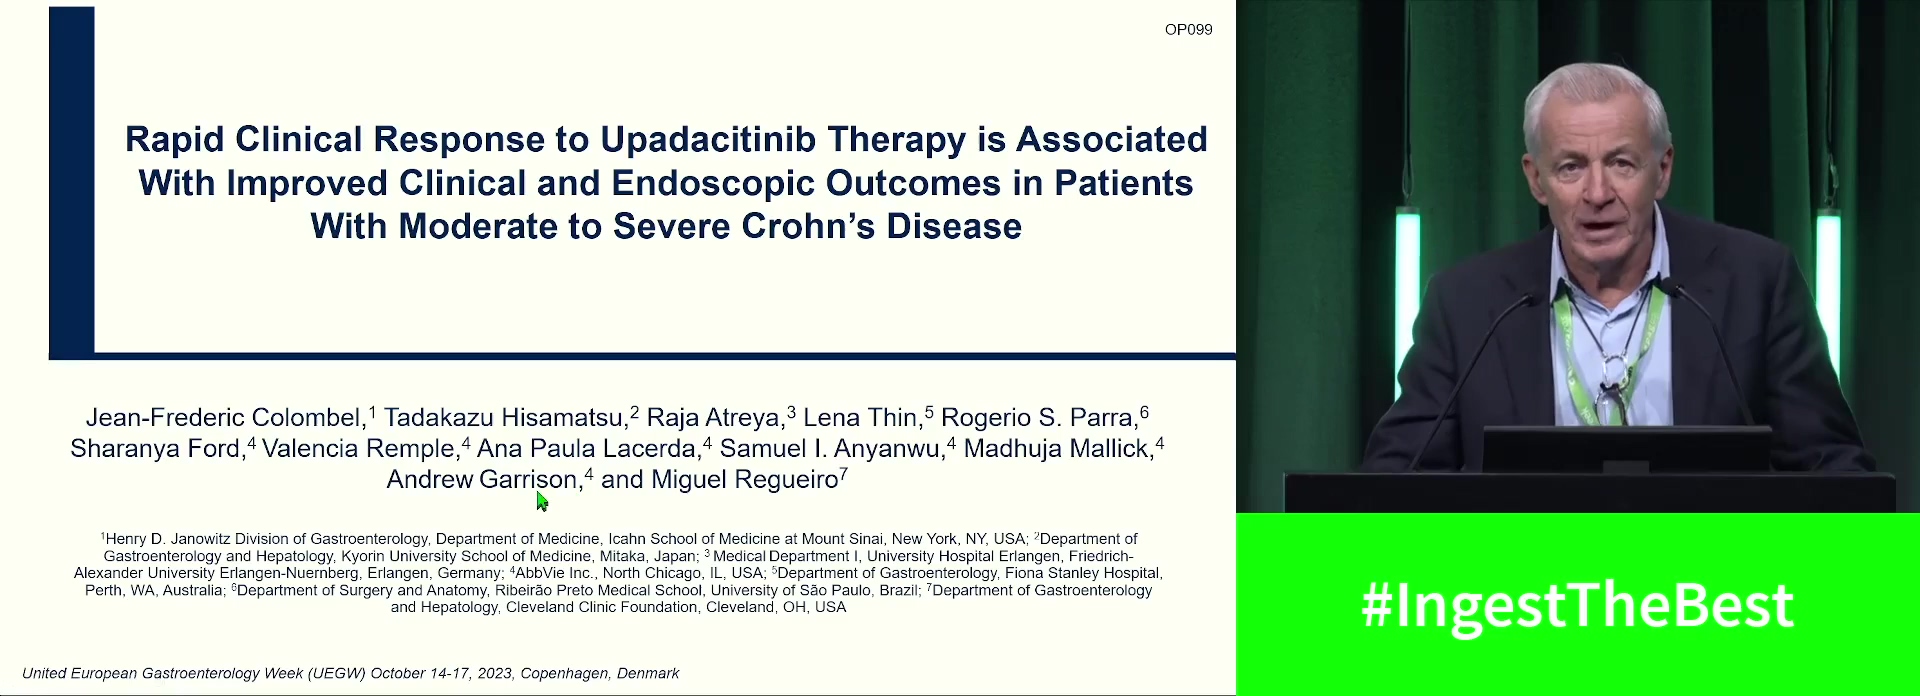 RAPID CLINICAL RESPONSE TO UPADACITINIB THERAPY IS ASSOCIATED WITH IMPROVED CLINICAL AND ENDOSCOPIC OUTCOMES IN PATIENTS WITH MODERATE TO SEVERE CROHN’S DISEASE